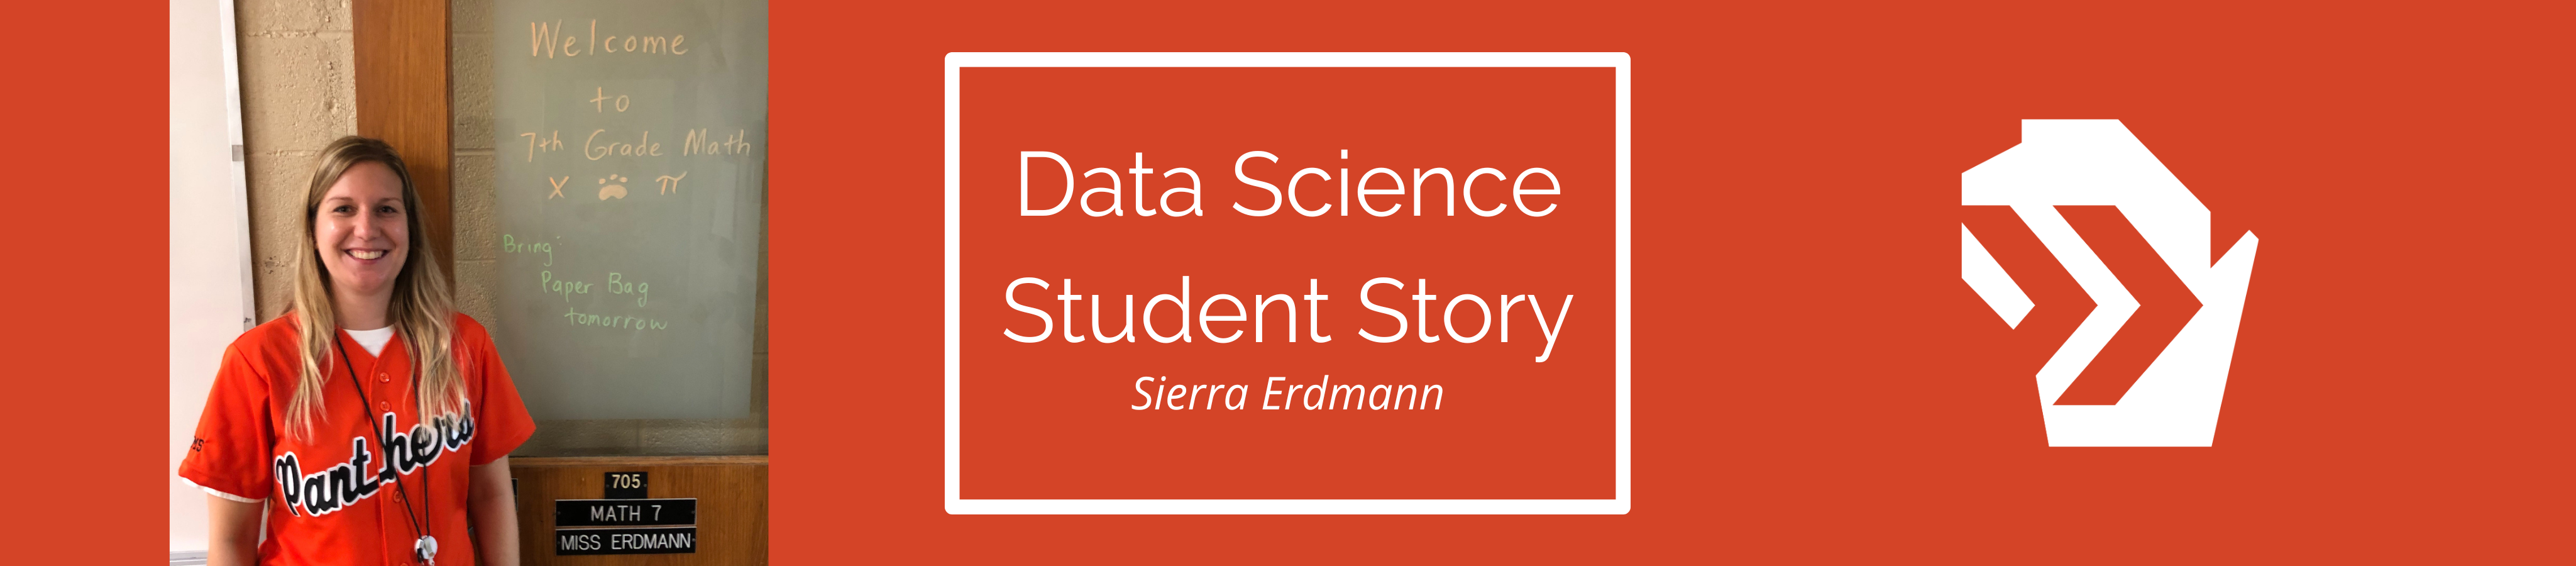 Graphic with a photo of UW Data Science student Sierra Erdmann, who works as a data analyst.